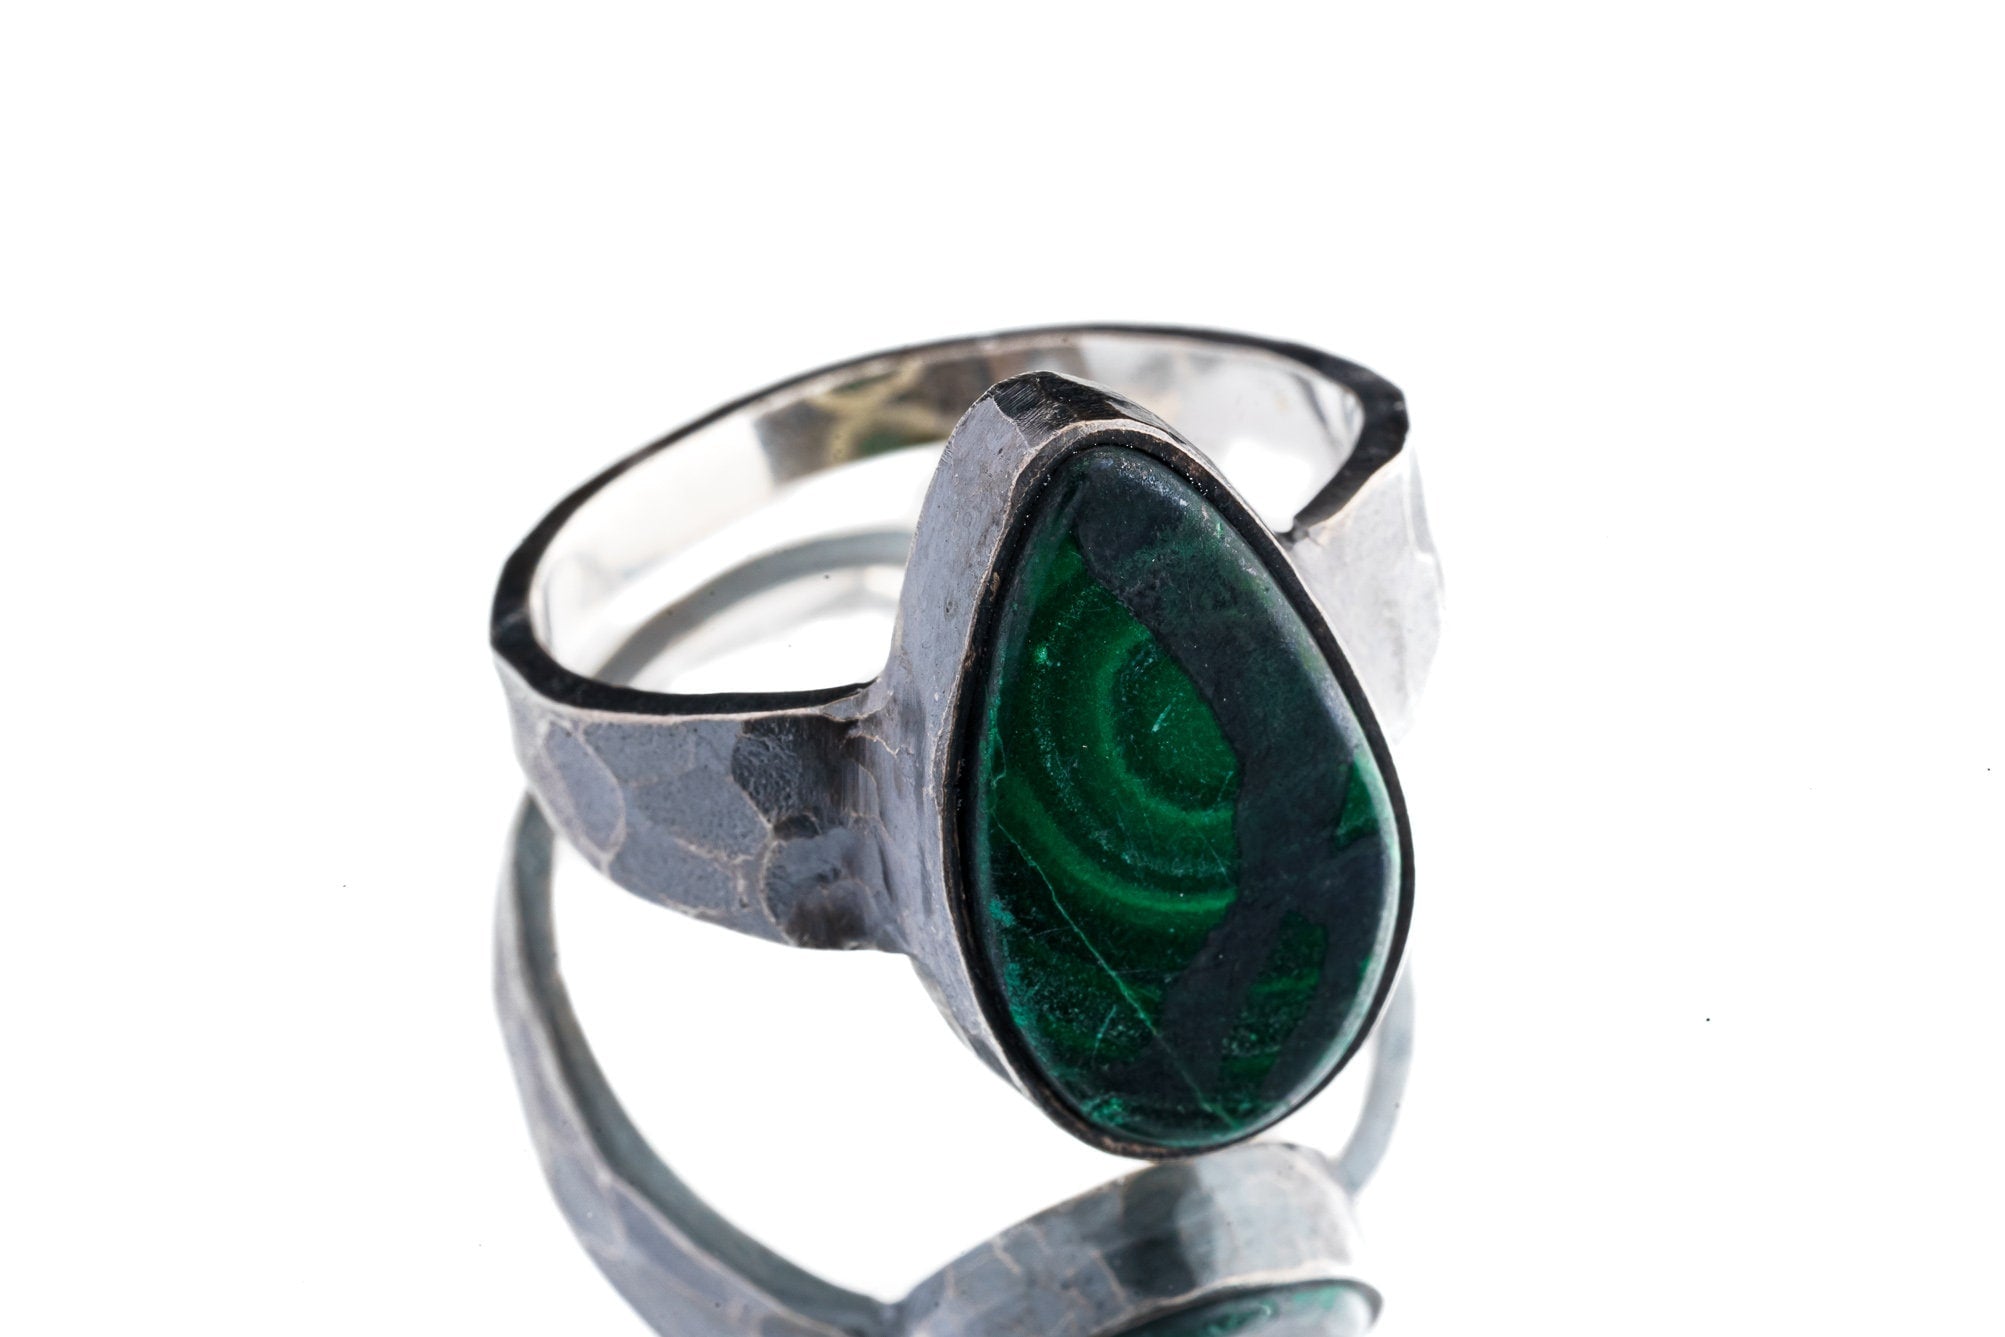 Flat Malachite Teardrop Cabochon - Men's / Unisex Large Crystal Ring - Size 12 US - 925 Sterling Silver - Hammer Textured & Oxidised